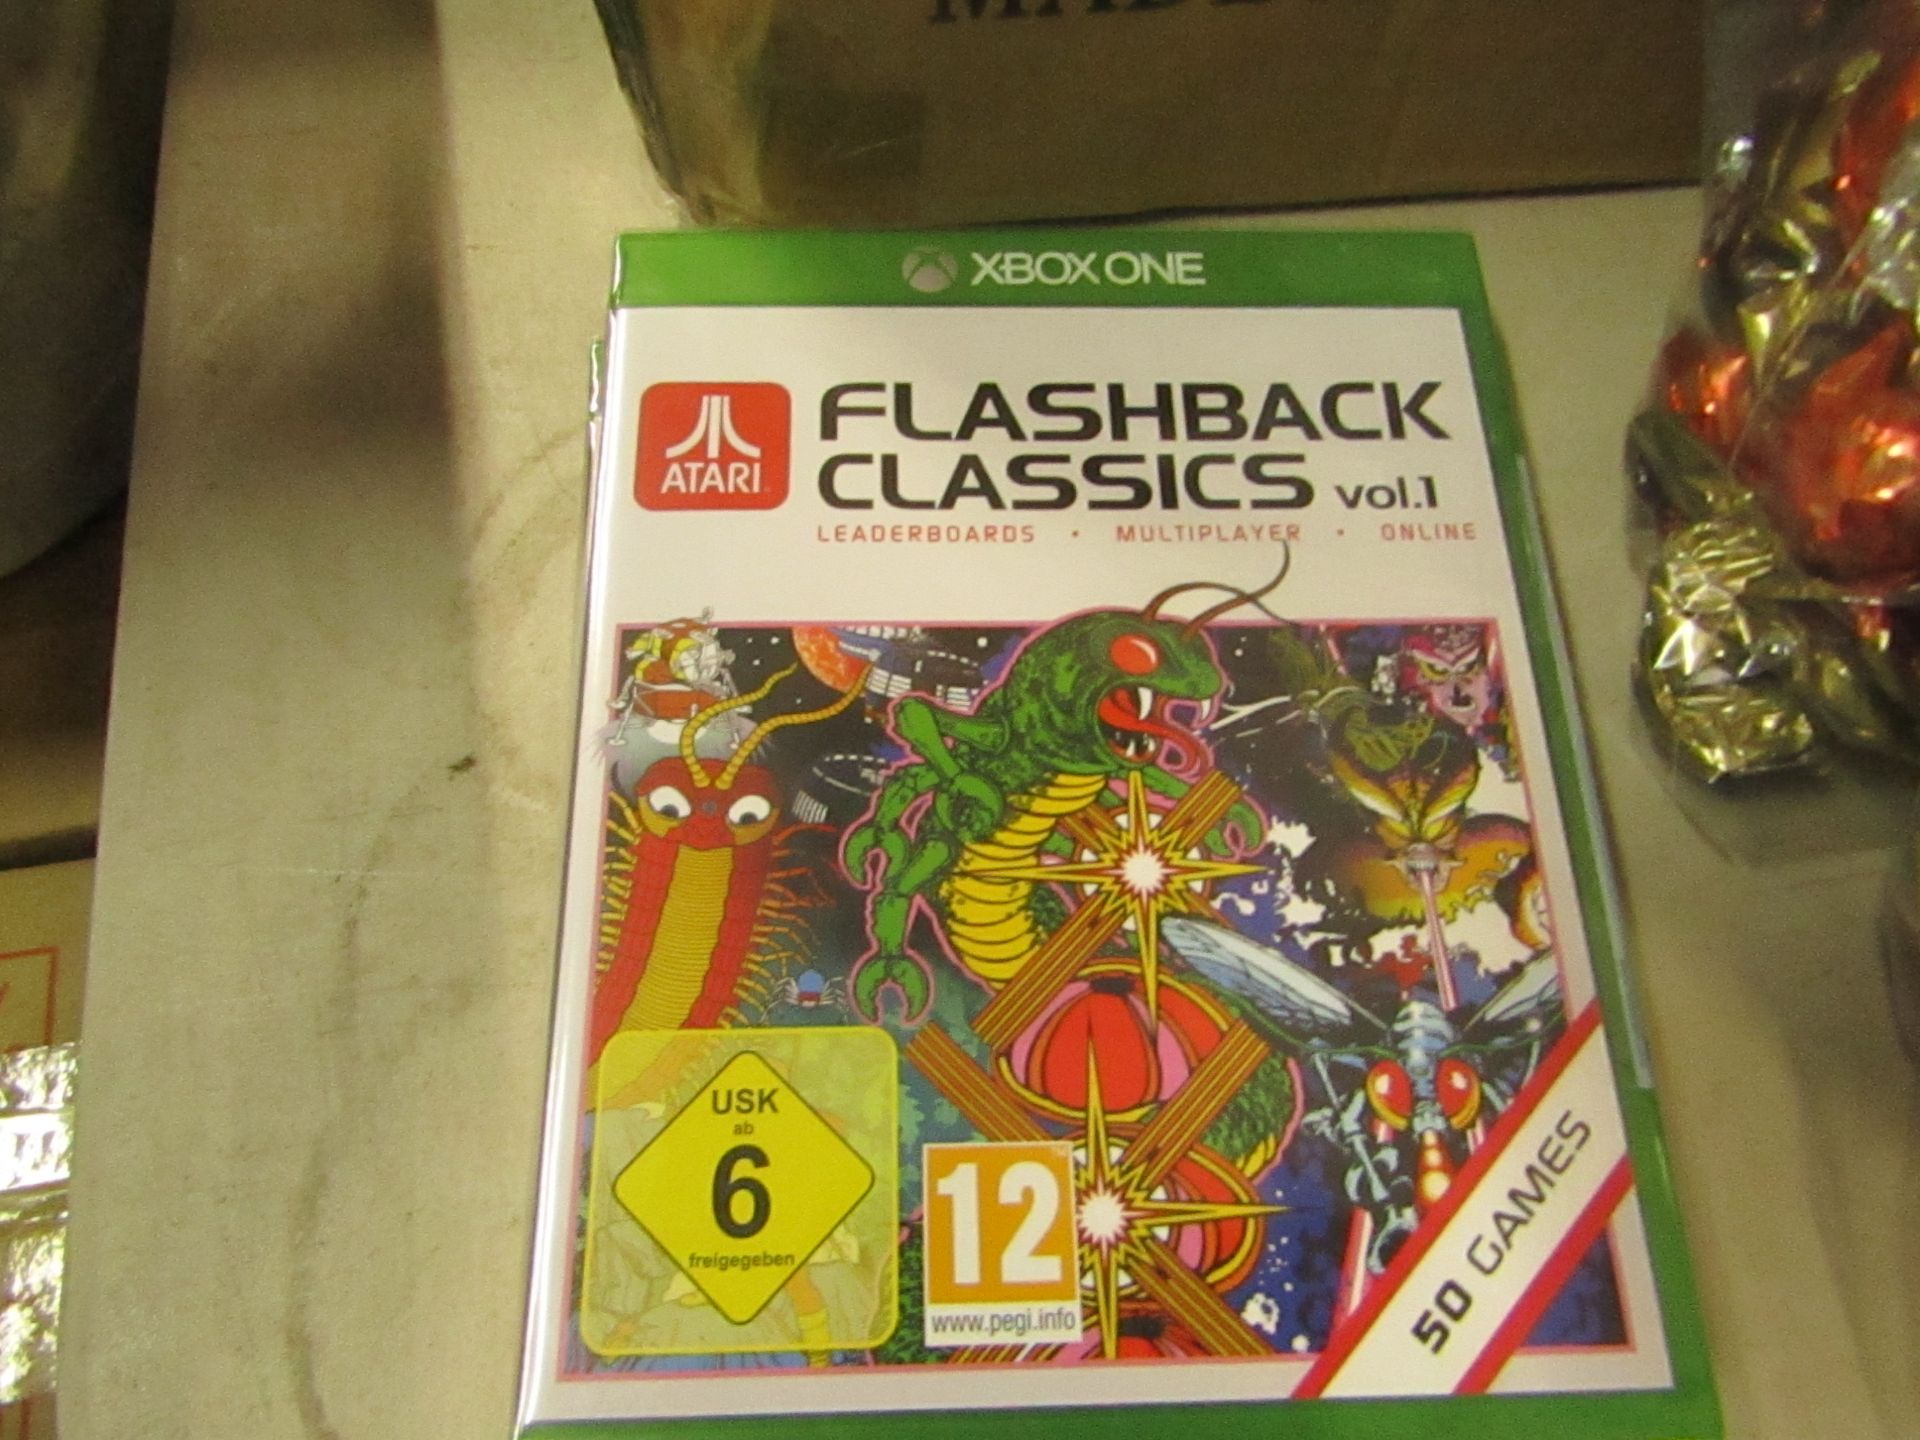 Xbox one Atari Flashback Classics volume 1. New & packaged. Ideal Stocking filler